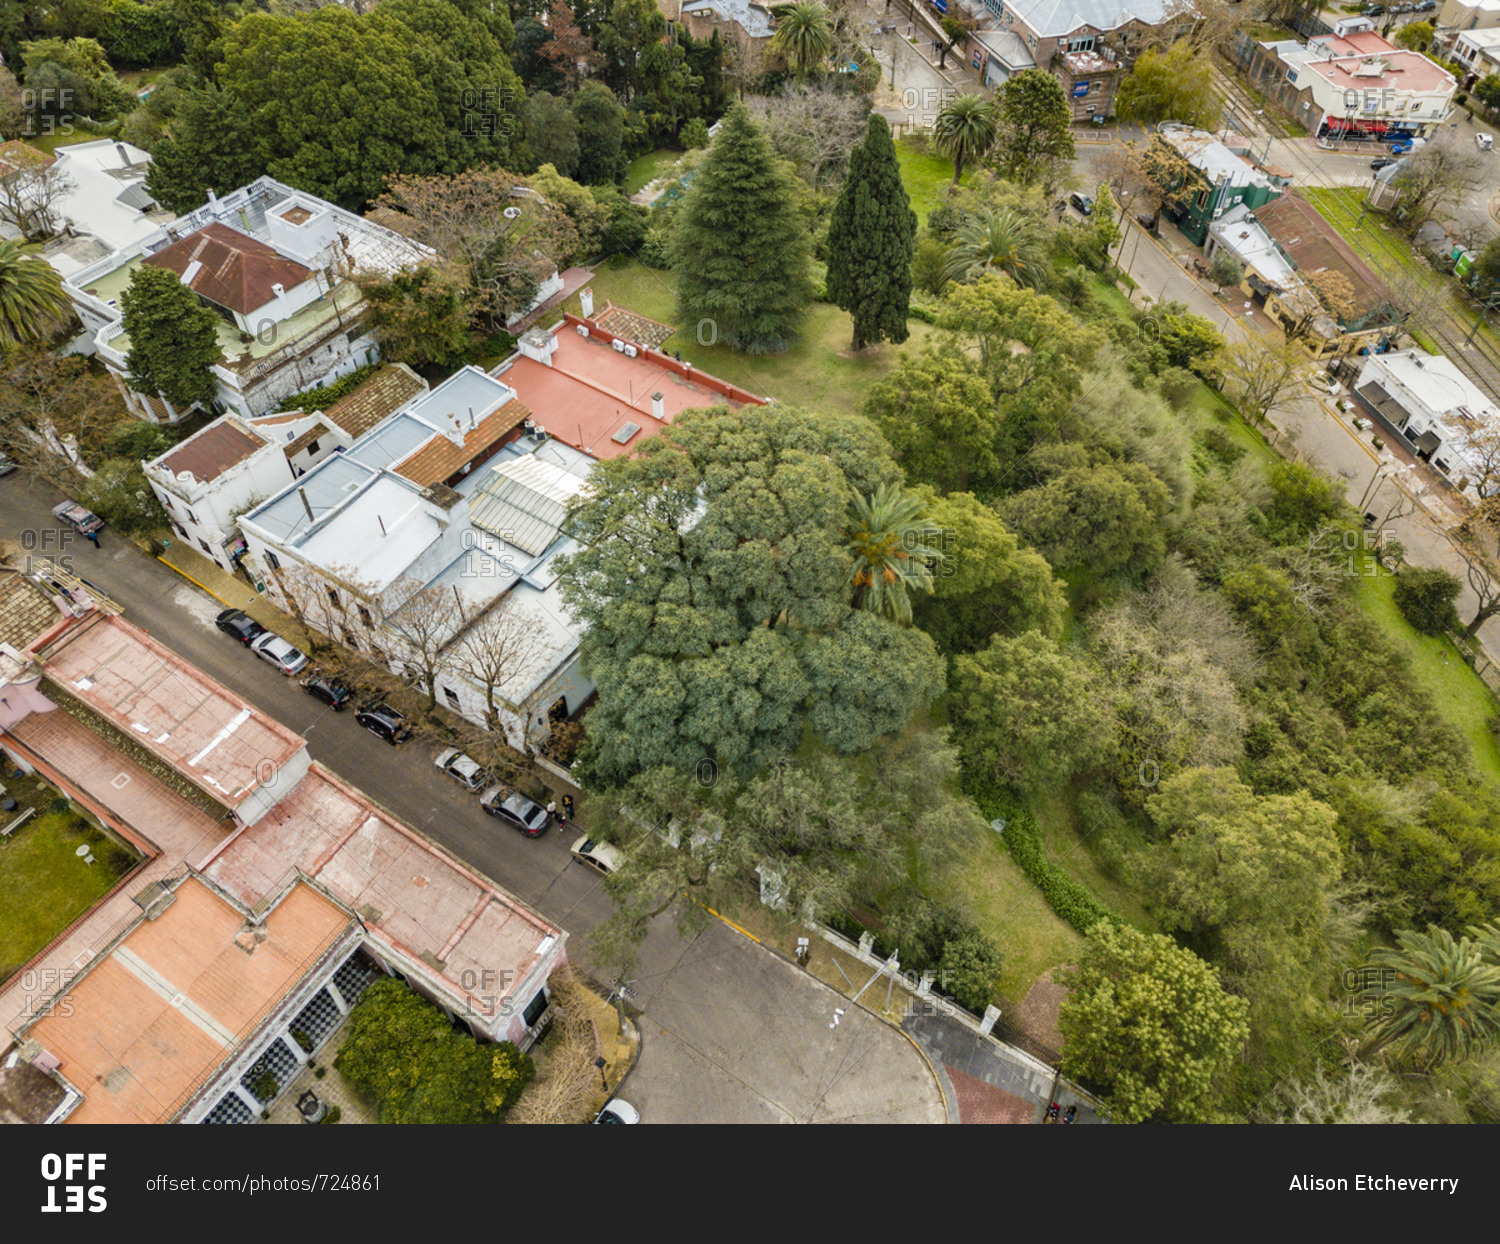 Aerial view of buildings in the suburbs of Buenos Aires, Argentina